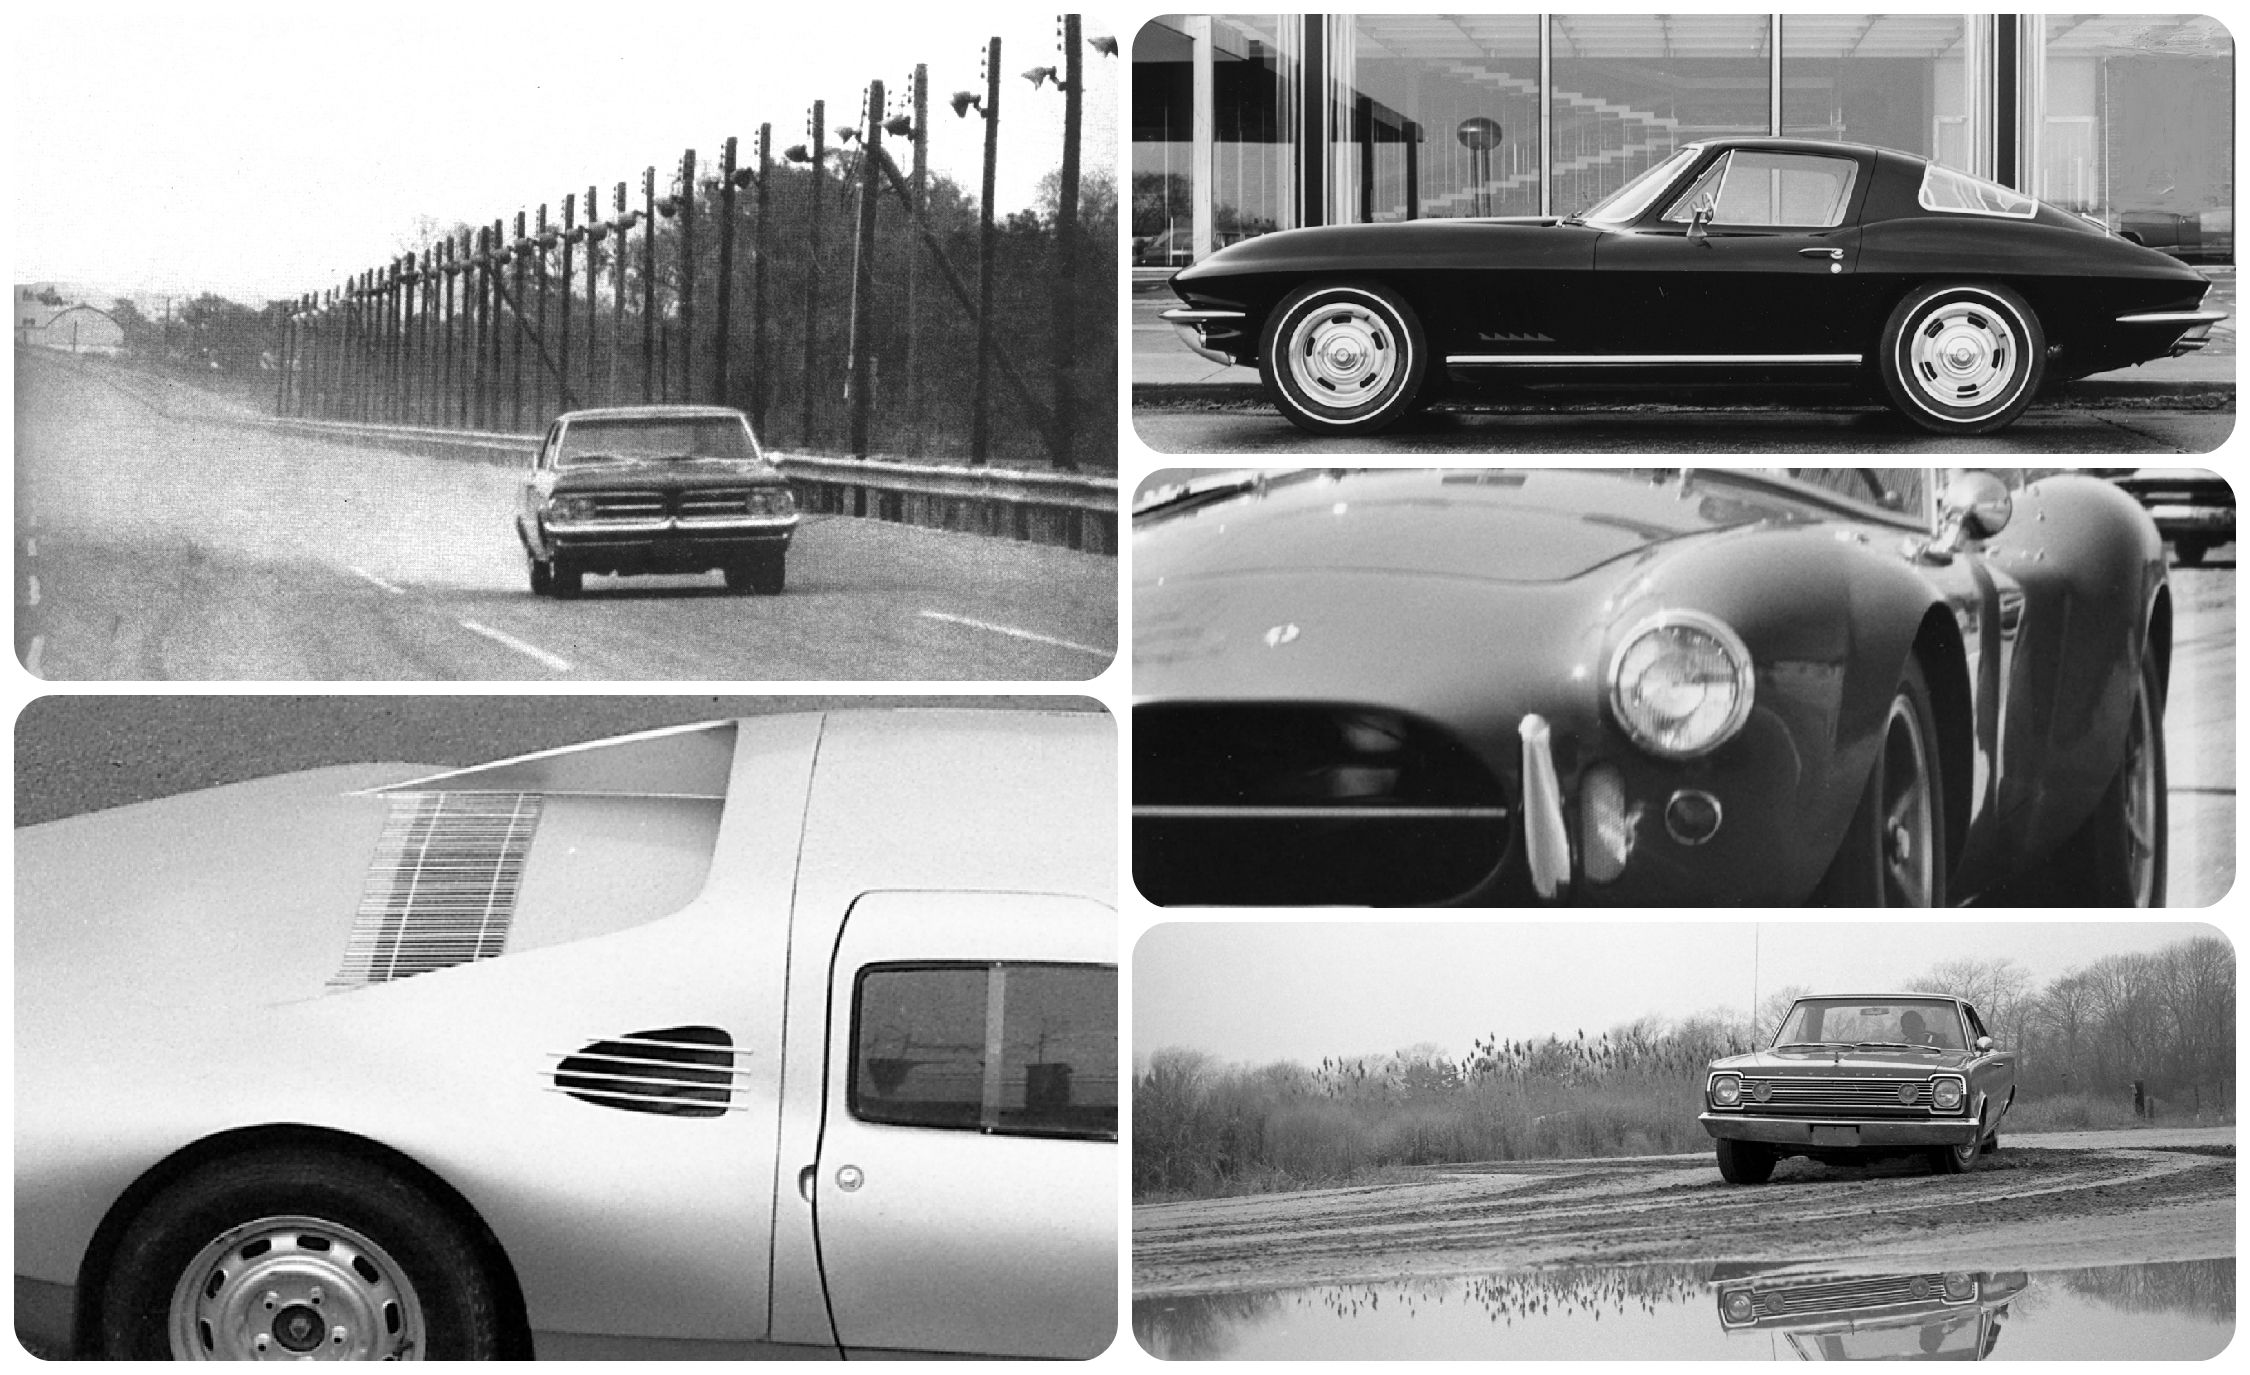 1960s american muscle cars